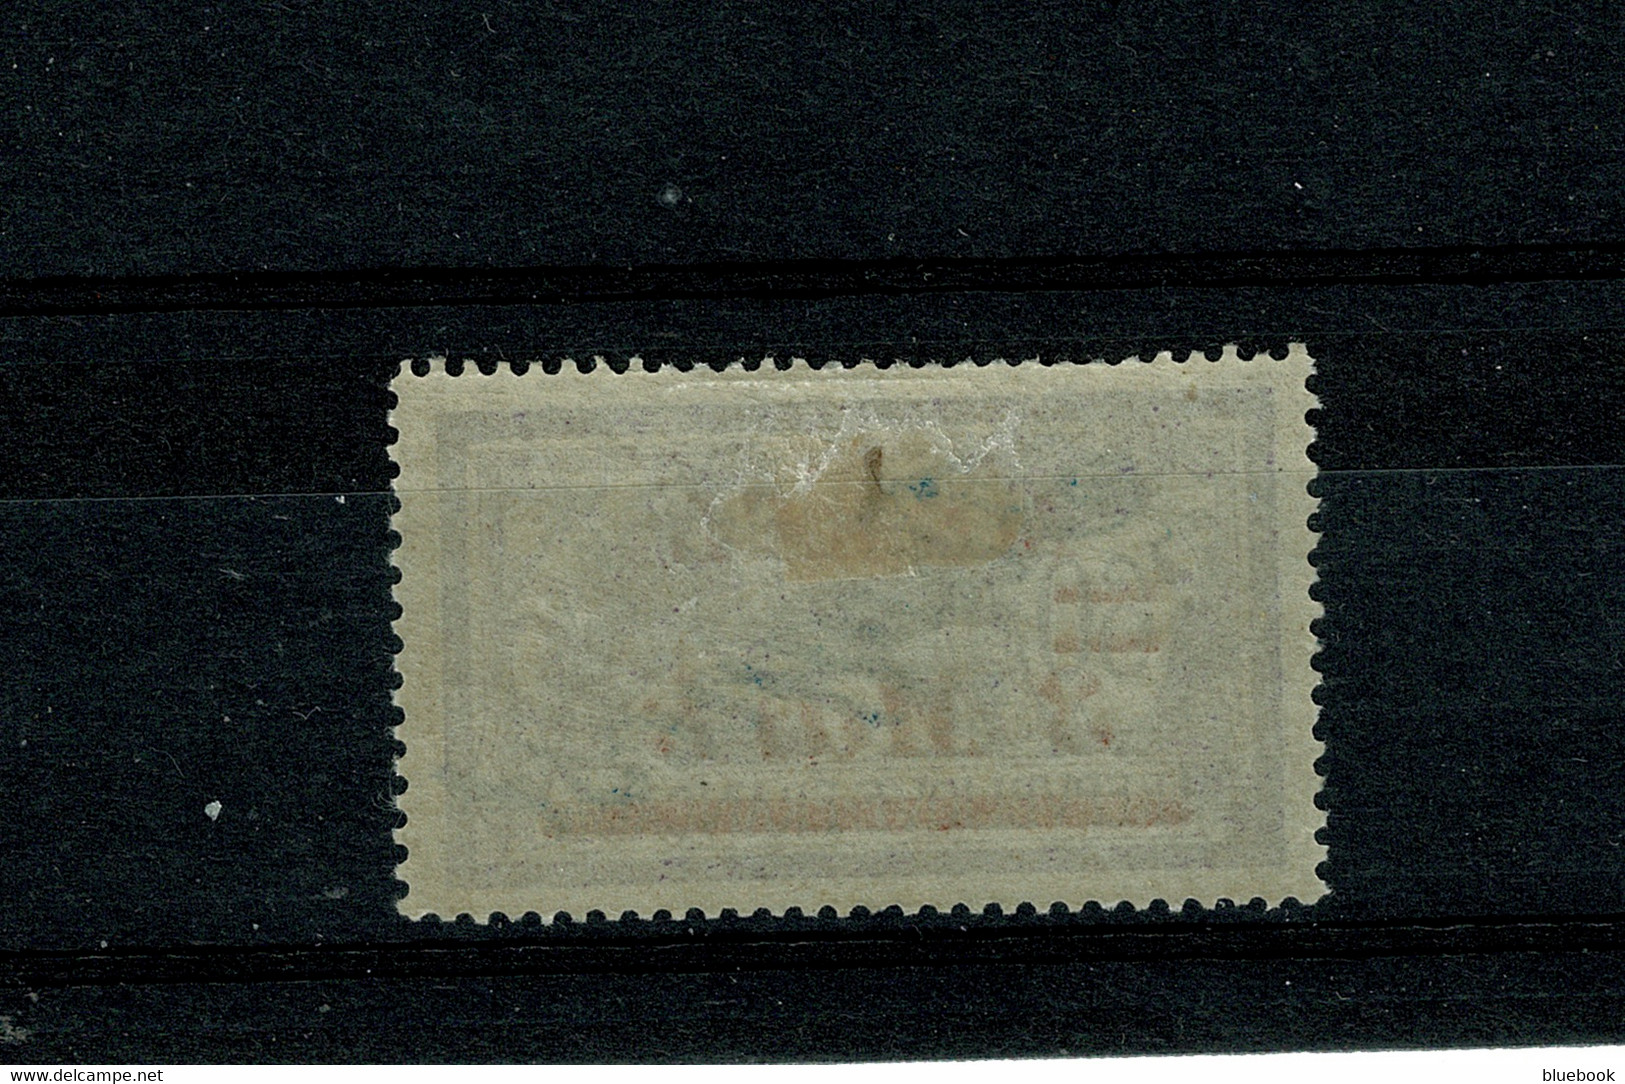 Ref 1418 - 1922 Mint France Stamp - Overprinted  Twice By Germany For Airmail & Use In Memel - Nuevos